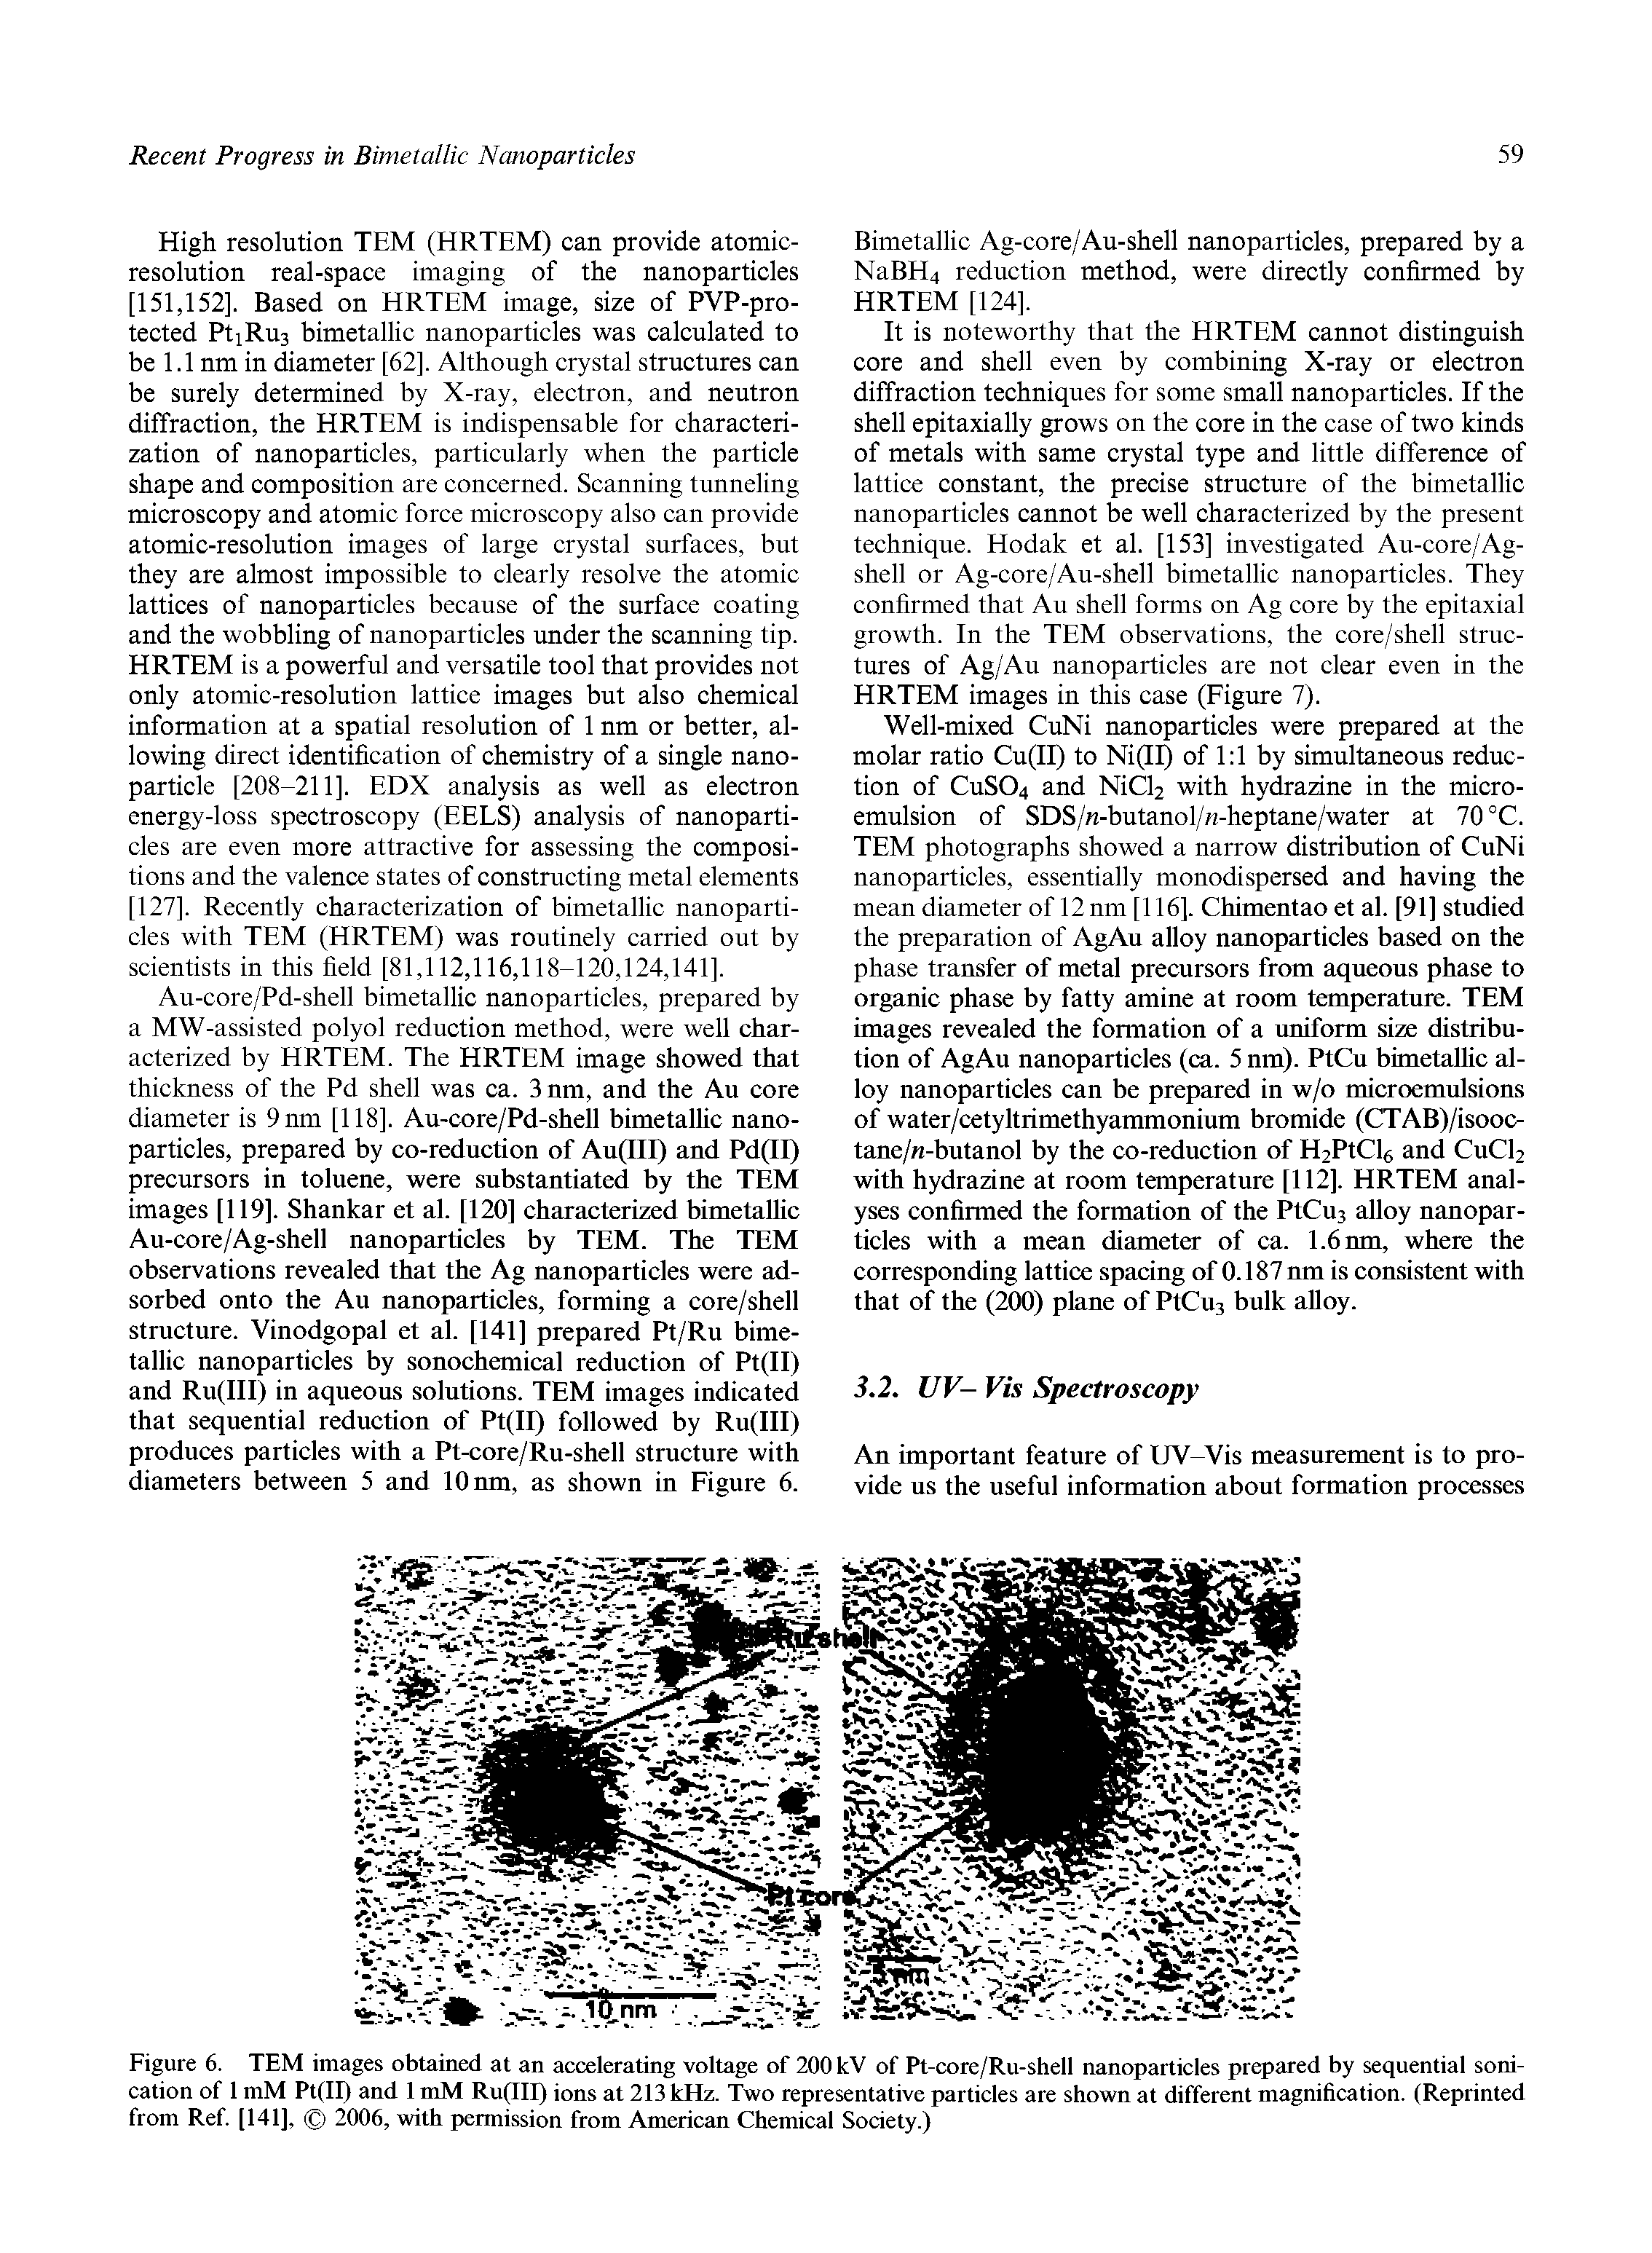 Figure 6. TEM images obtained at an accelerating voltage of 200 kV of Pt-core/Ru-shell nanoparticles prepared by sequential soni-cation of 1 mM Pt(ll) and 1 mM Ru(lll) ions at 213 kHz. Two representative particles are shown at different magnification. (Reprinted from Ref [141], 2006, with permission from American Chemical Society.)...